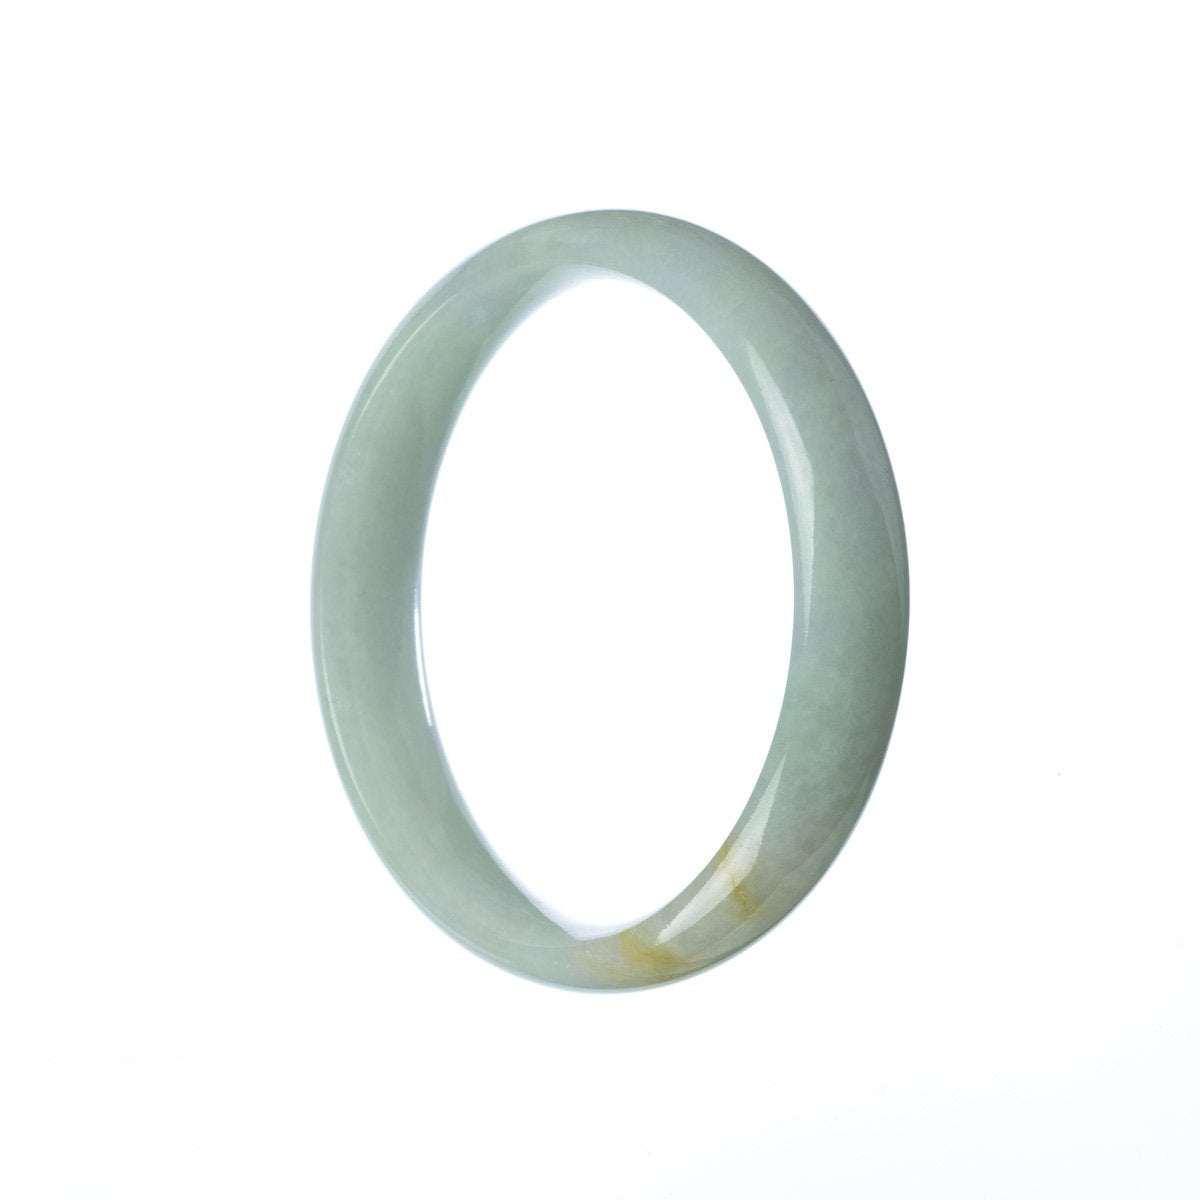 A half moon-shaped white jadeite jade bracelet, made of genuine Grade A jade. Measures 56mm in diameter. Perfect for adding a touch of elegance to any outfit. Sold by MAYS.